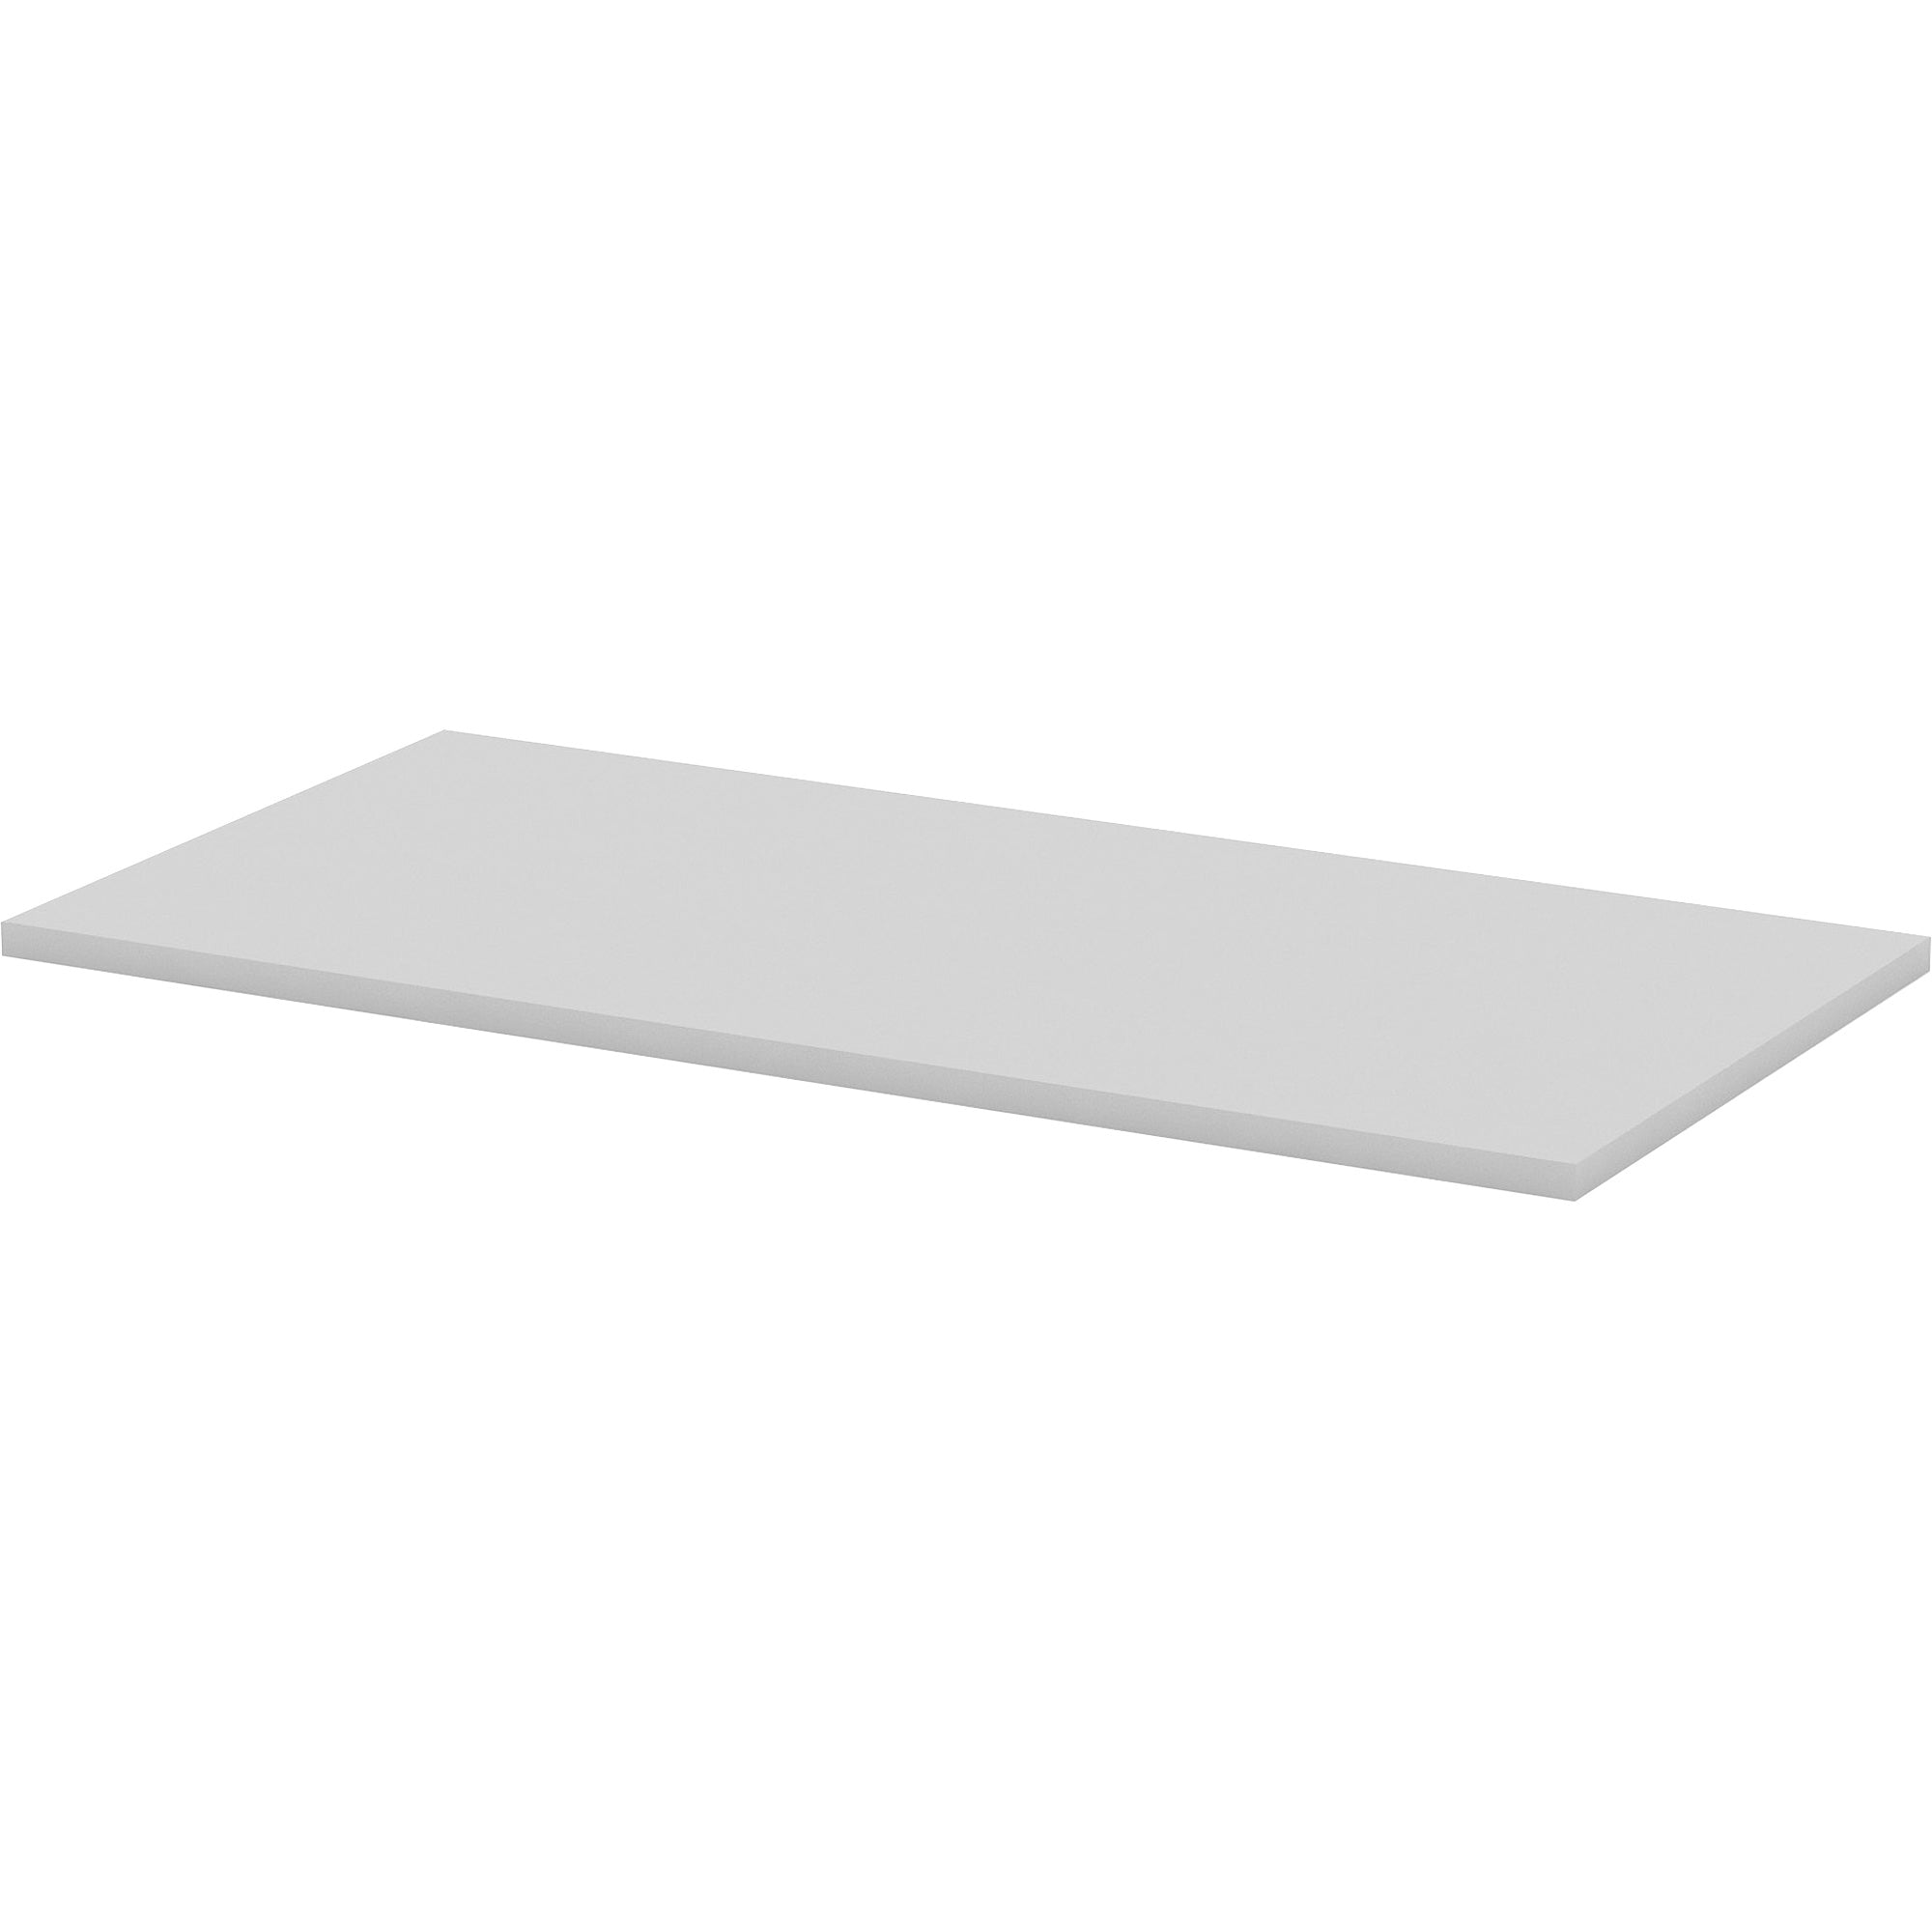 lorell-training-tabletop-for-table-topgray-rectangle-top-48-table-top-length-x-24-table-top-width-x-1-table-top-thickness-assembly-required-1-each_llr62594 - 1